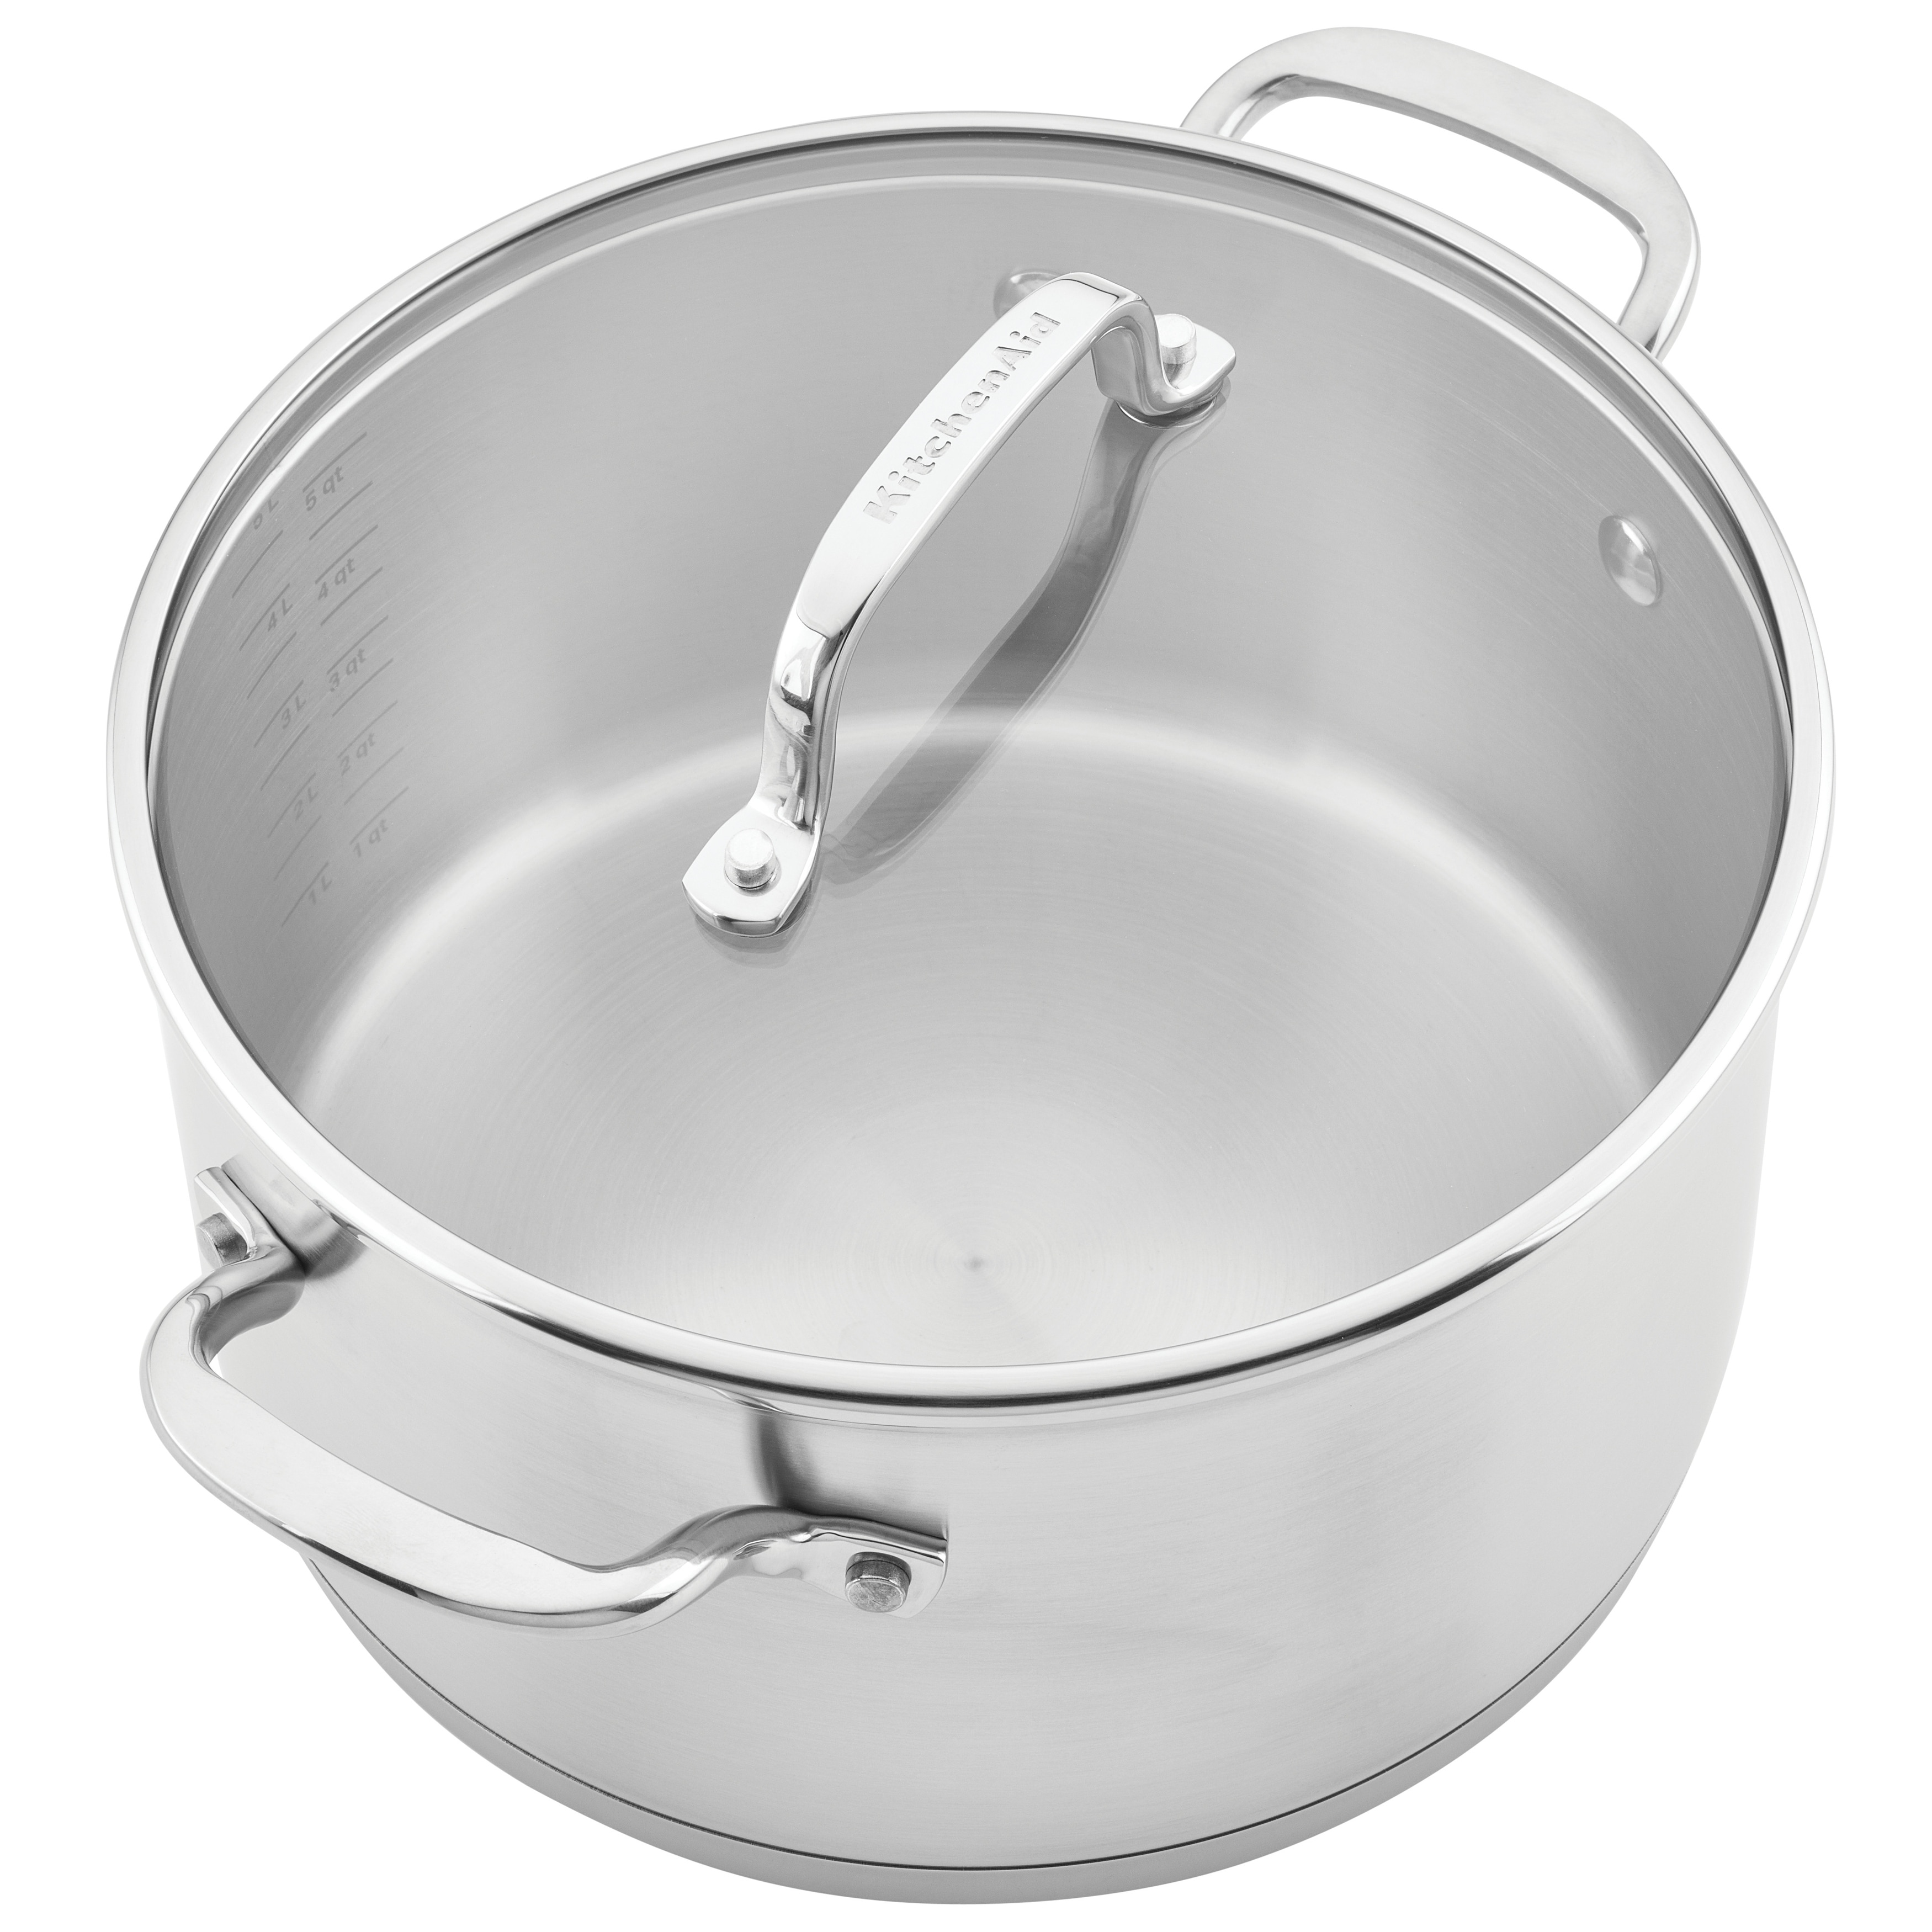 KitchenAid 3-Ply Base Stainless Steel Cookware Induction Pots and